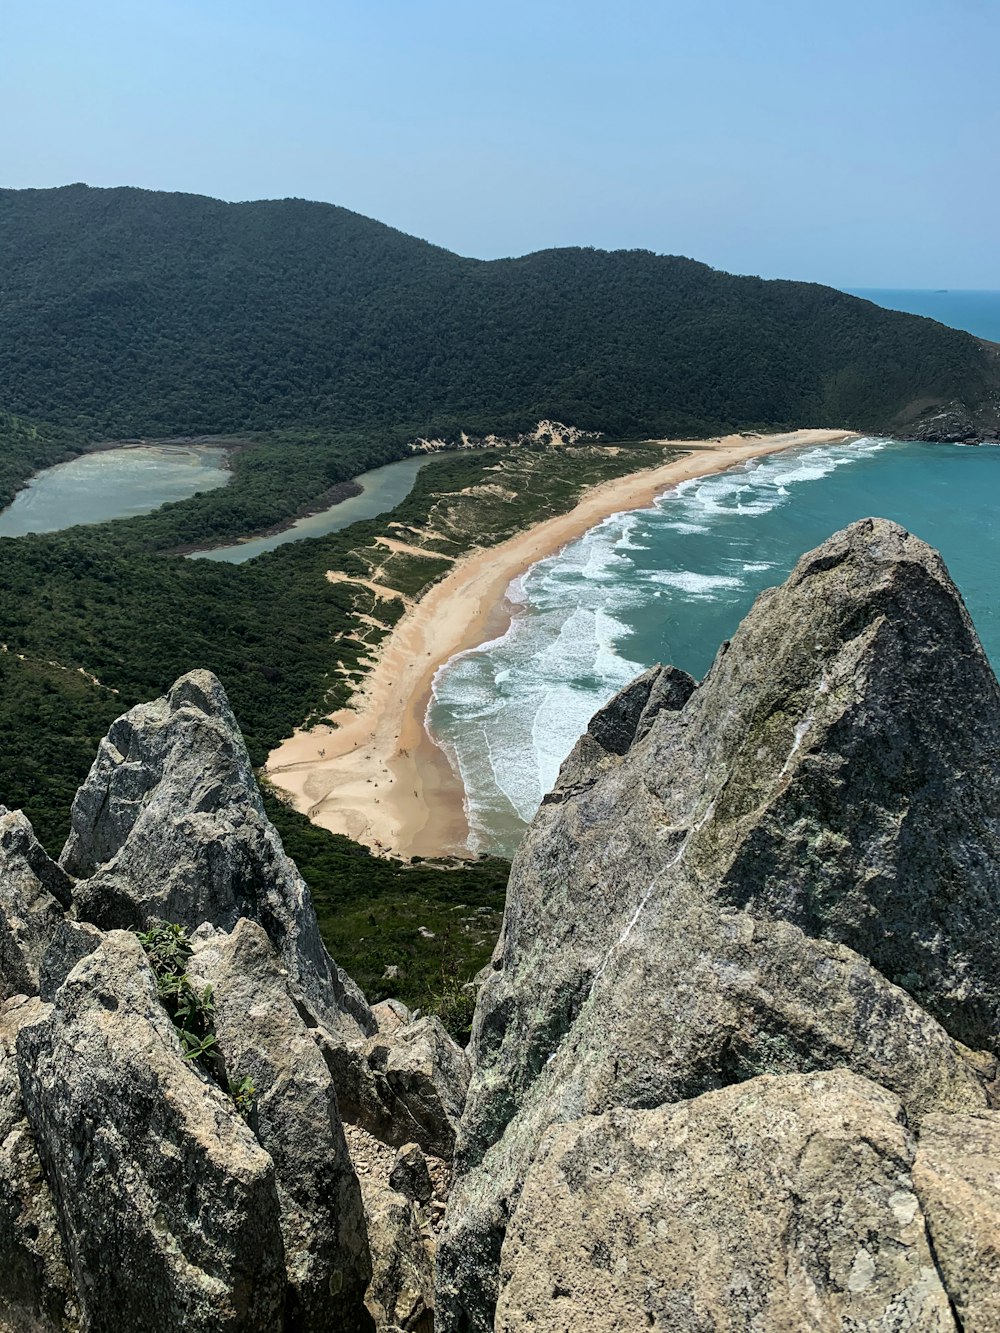 a view of a beach from the top of a mountain